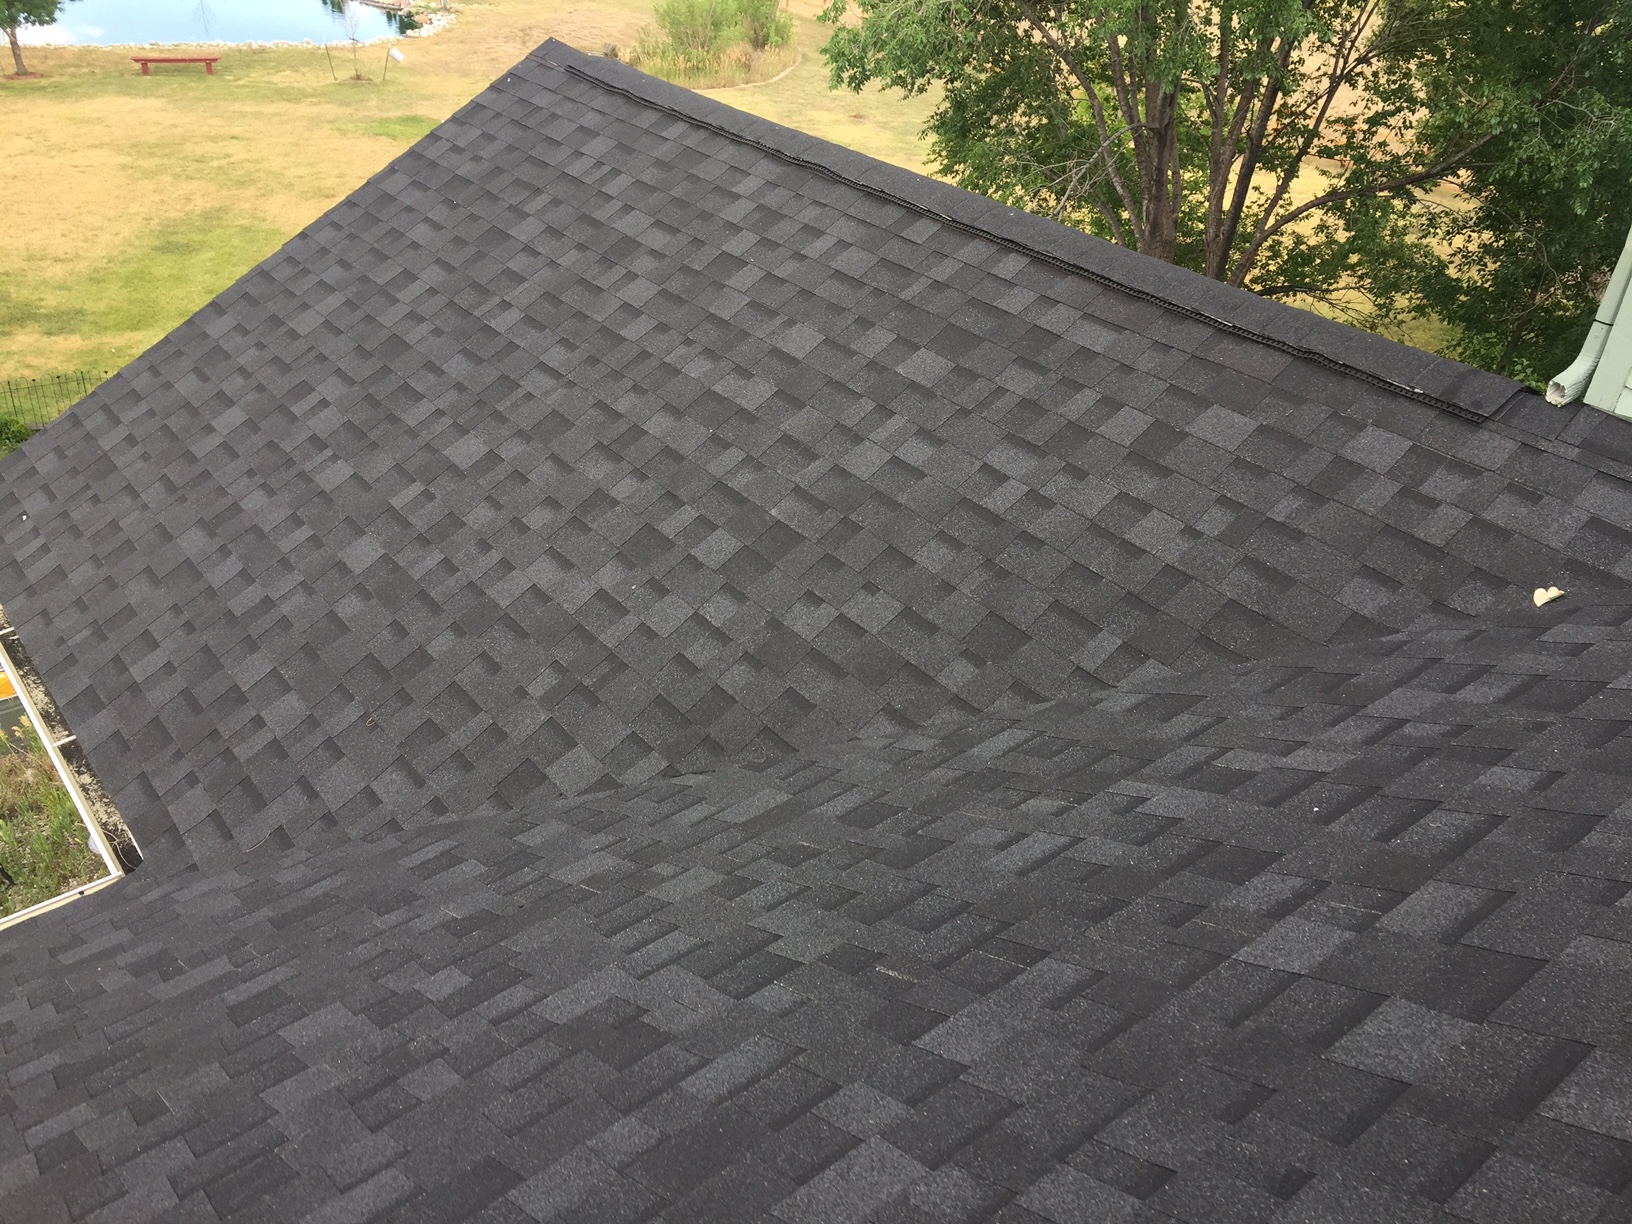 New House Roof Install Fort Collins Owens Corning Oakridge Onyx Black Bob Behrends Roofing Gutters